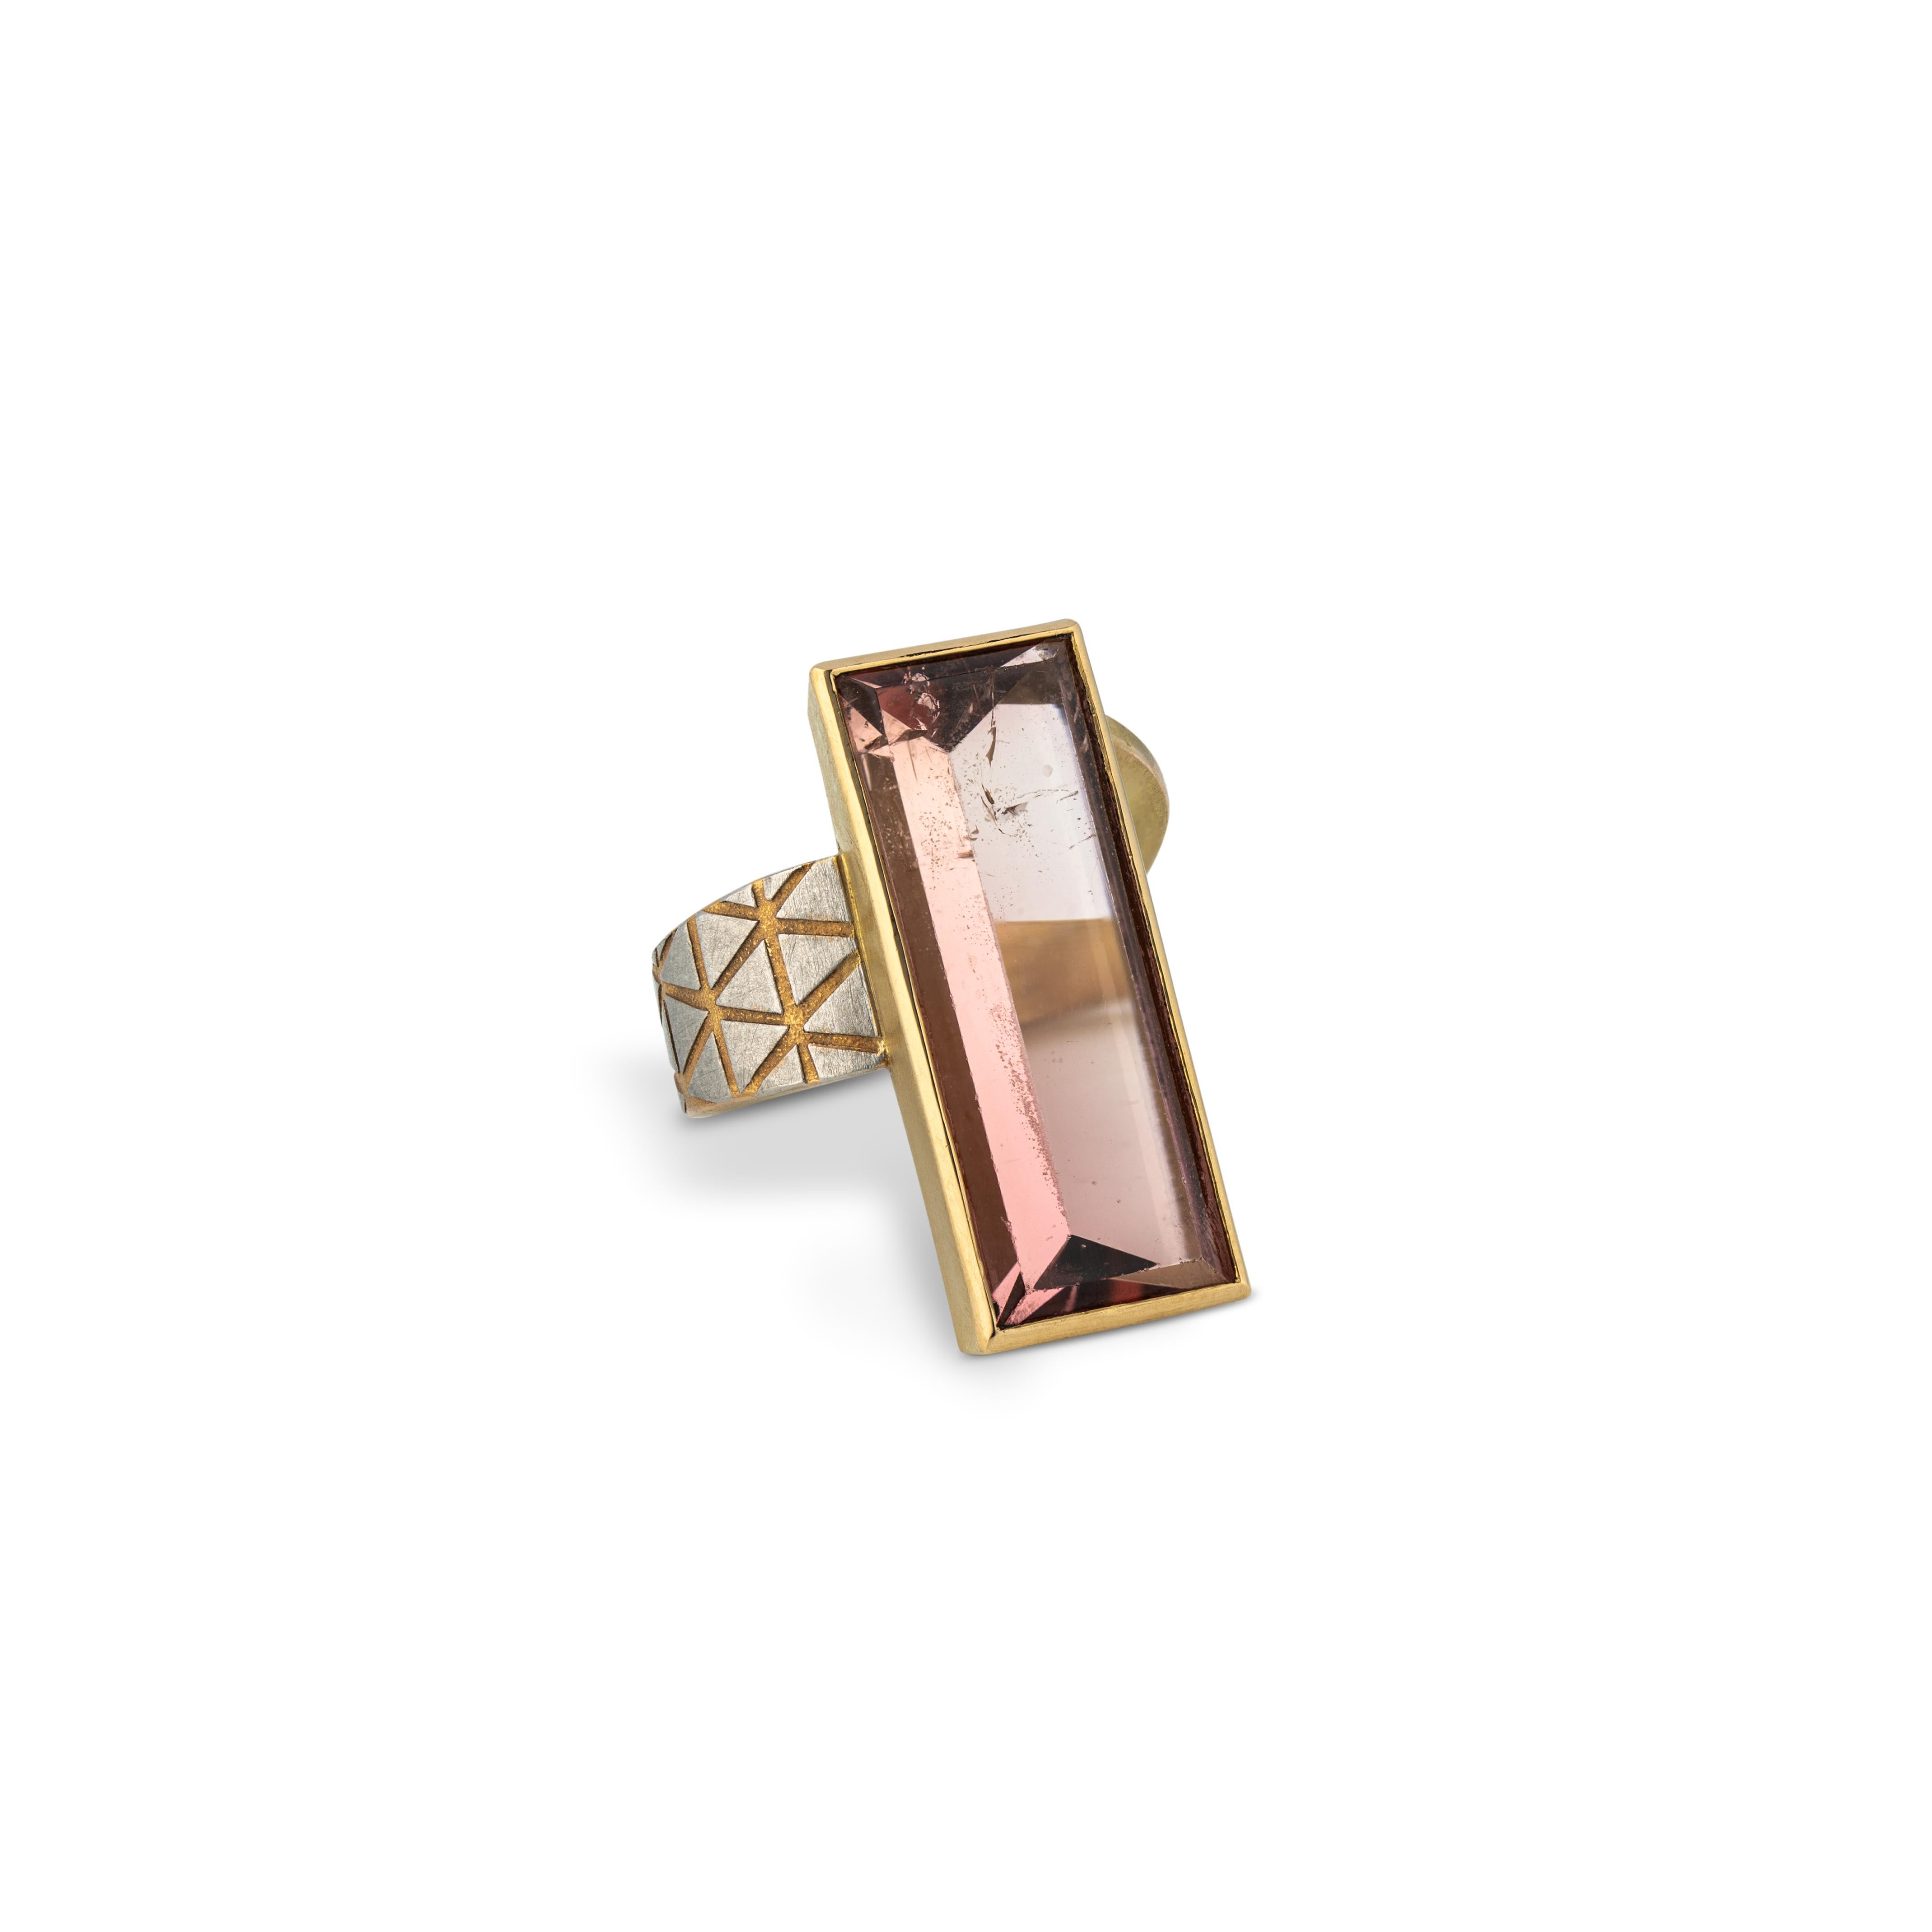 Magnificent ring by Zobel is a masterpiece of craftmanship. The unusual design is typically for Atelier Zobel.
With a rose colored tourmaline of 30 x 11 mm / 1.18 x 0.43 inches, set in yellow gold on a yellow gold ring band which is decorated with a